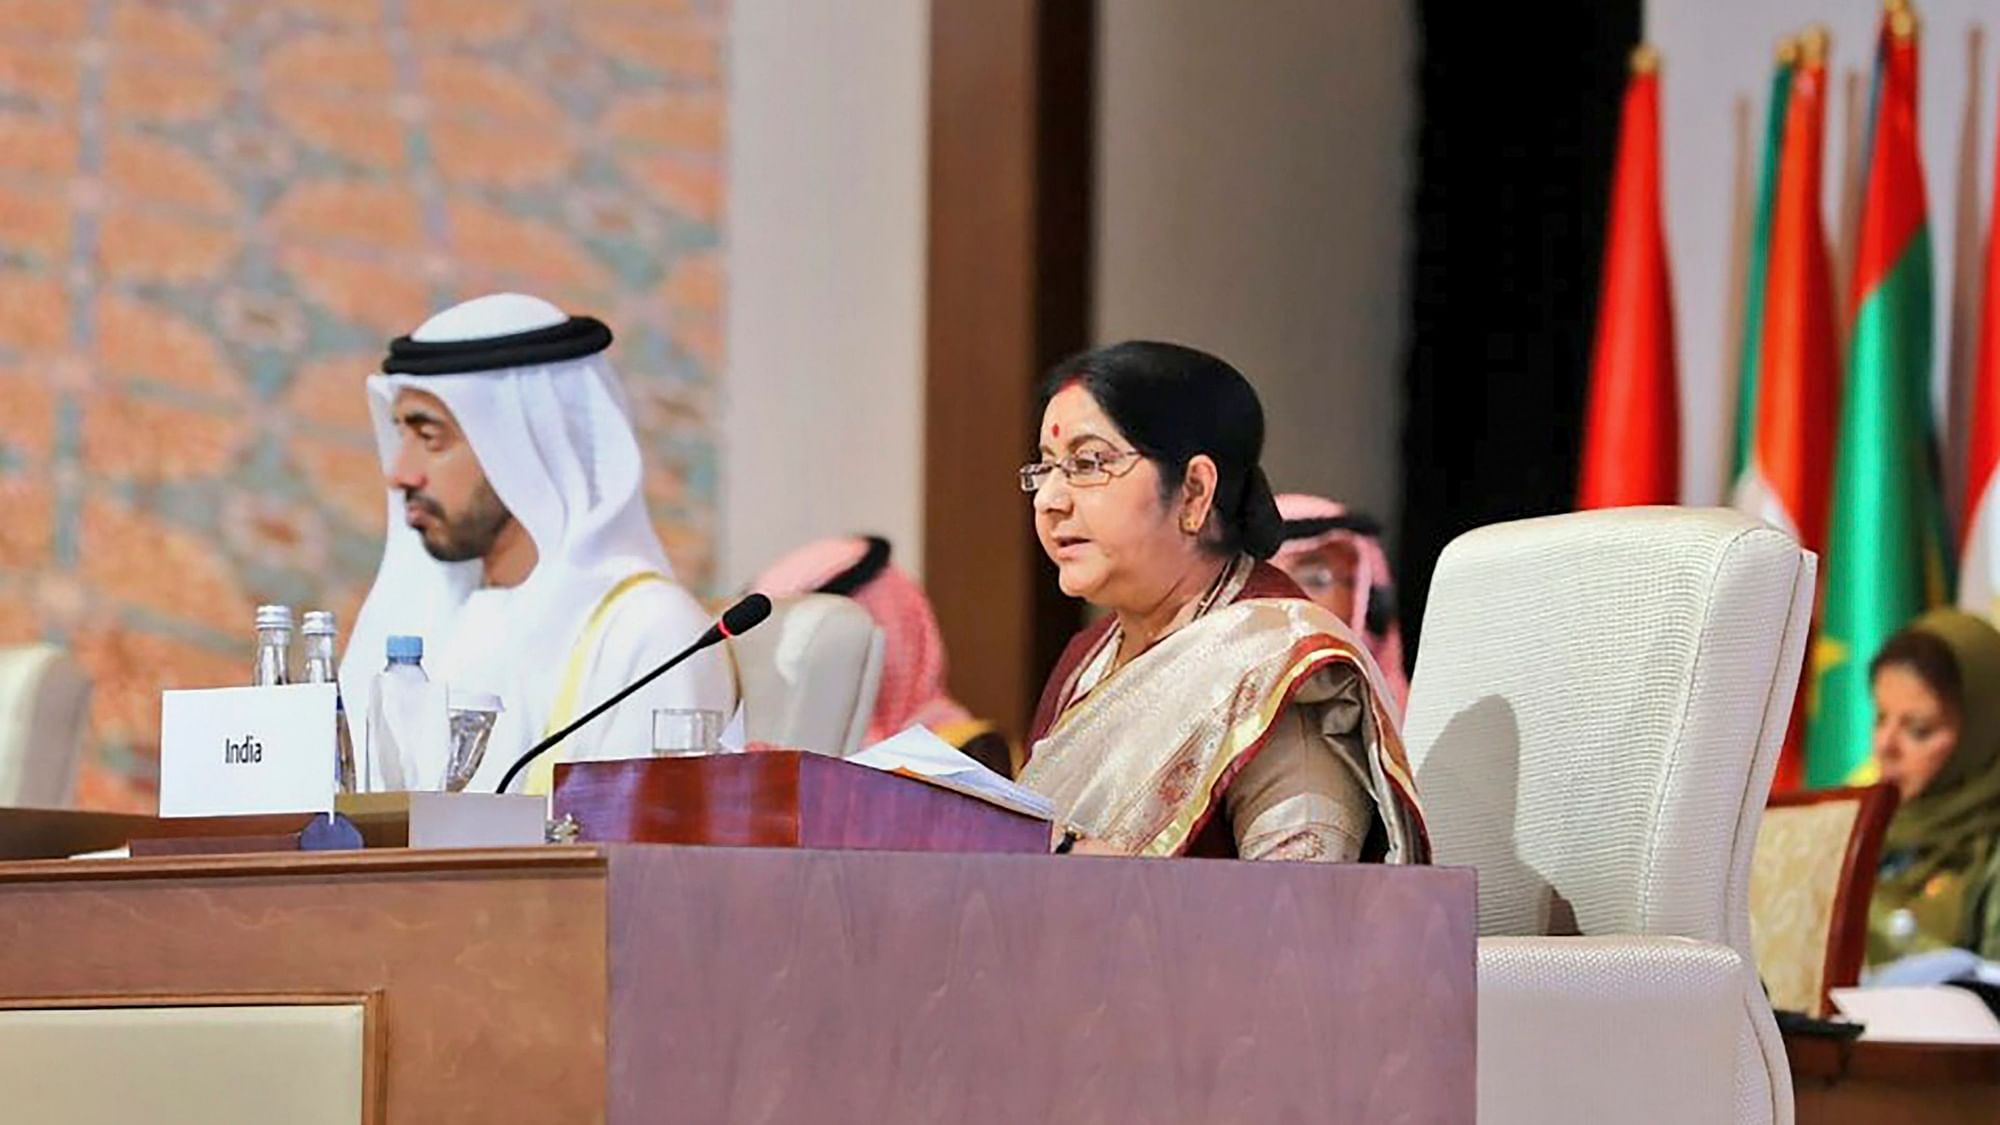 External Affairs Minister Sushma Swaraj addressed as ‘Guest of Honour’ at the 46th Foreign Ministers Meeting of Organisation of Islamic Cooperation in Abu Dhabi, Friday, 1 March 2019.